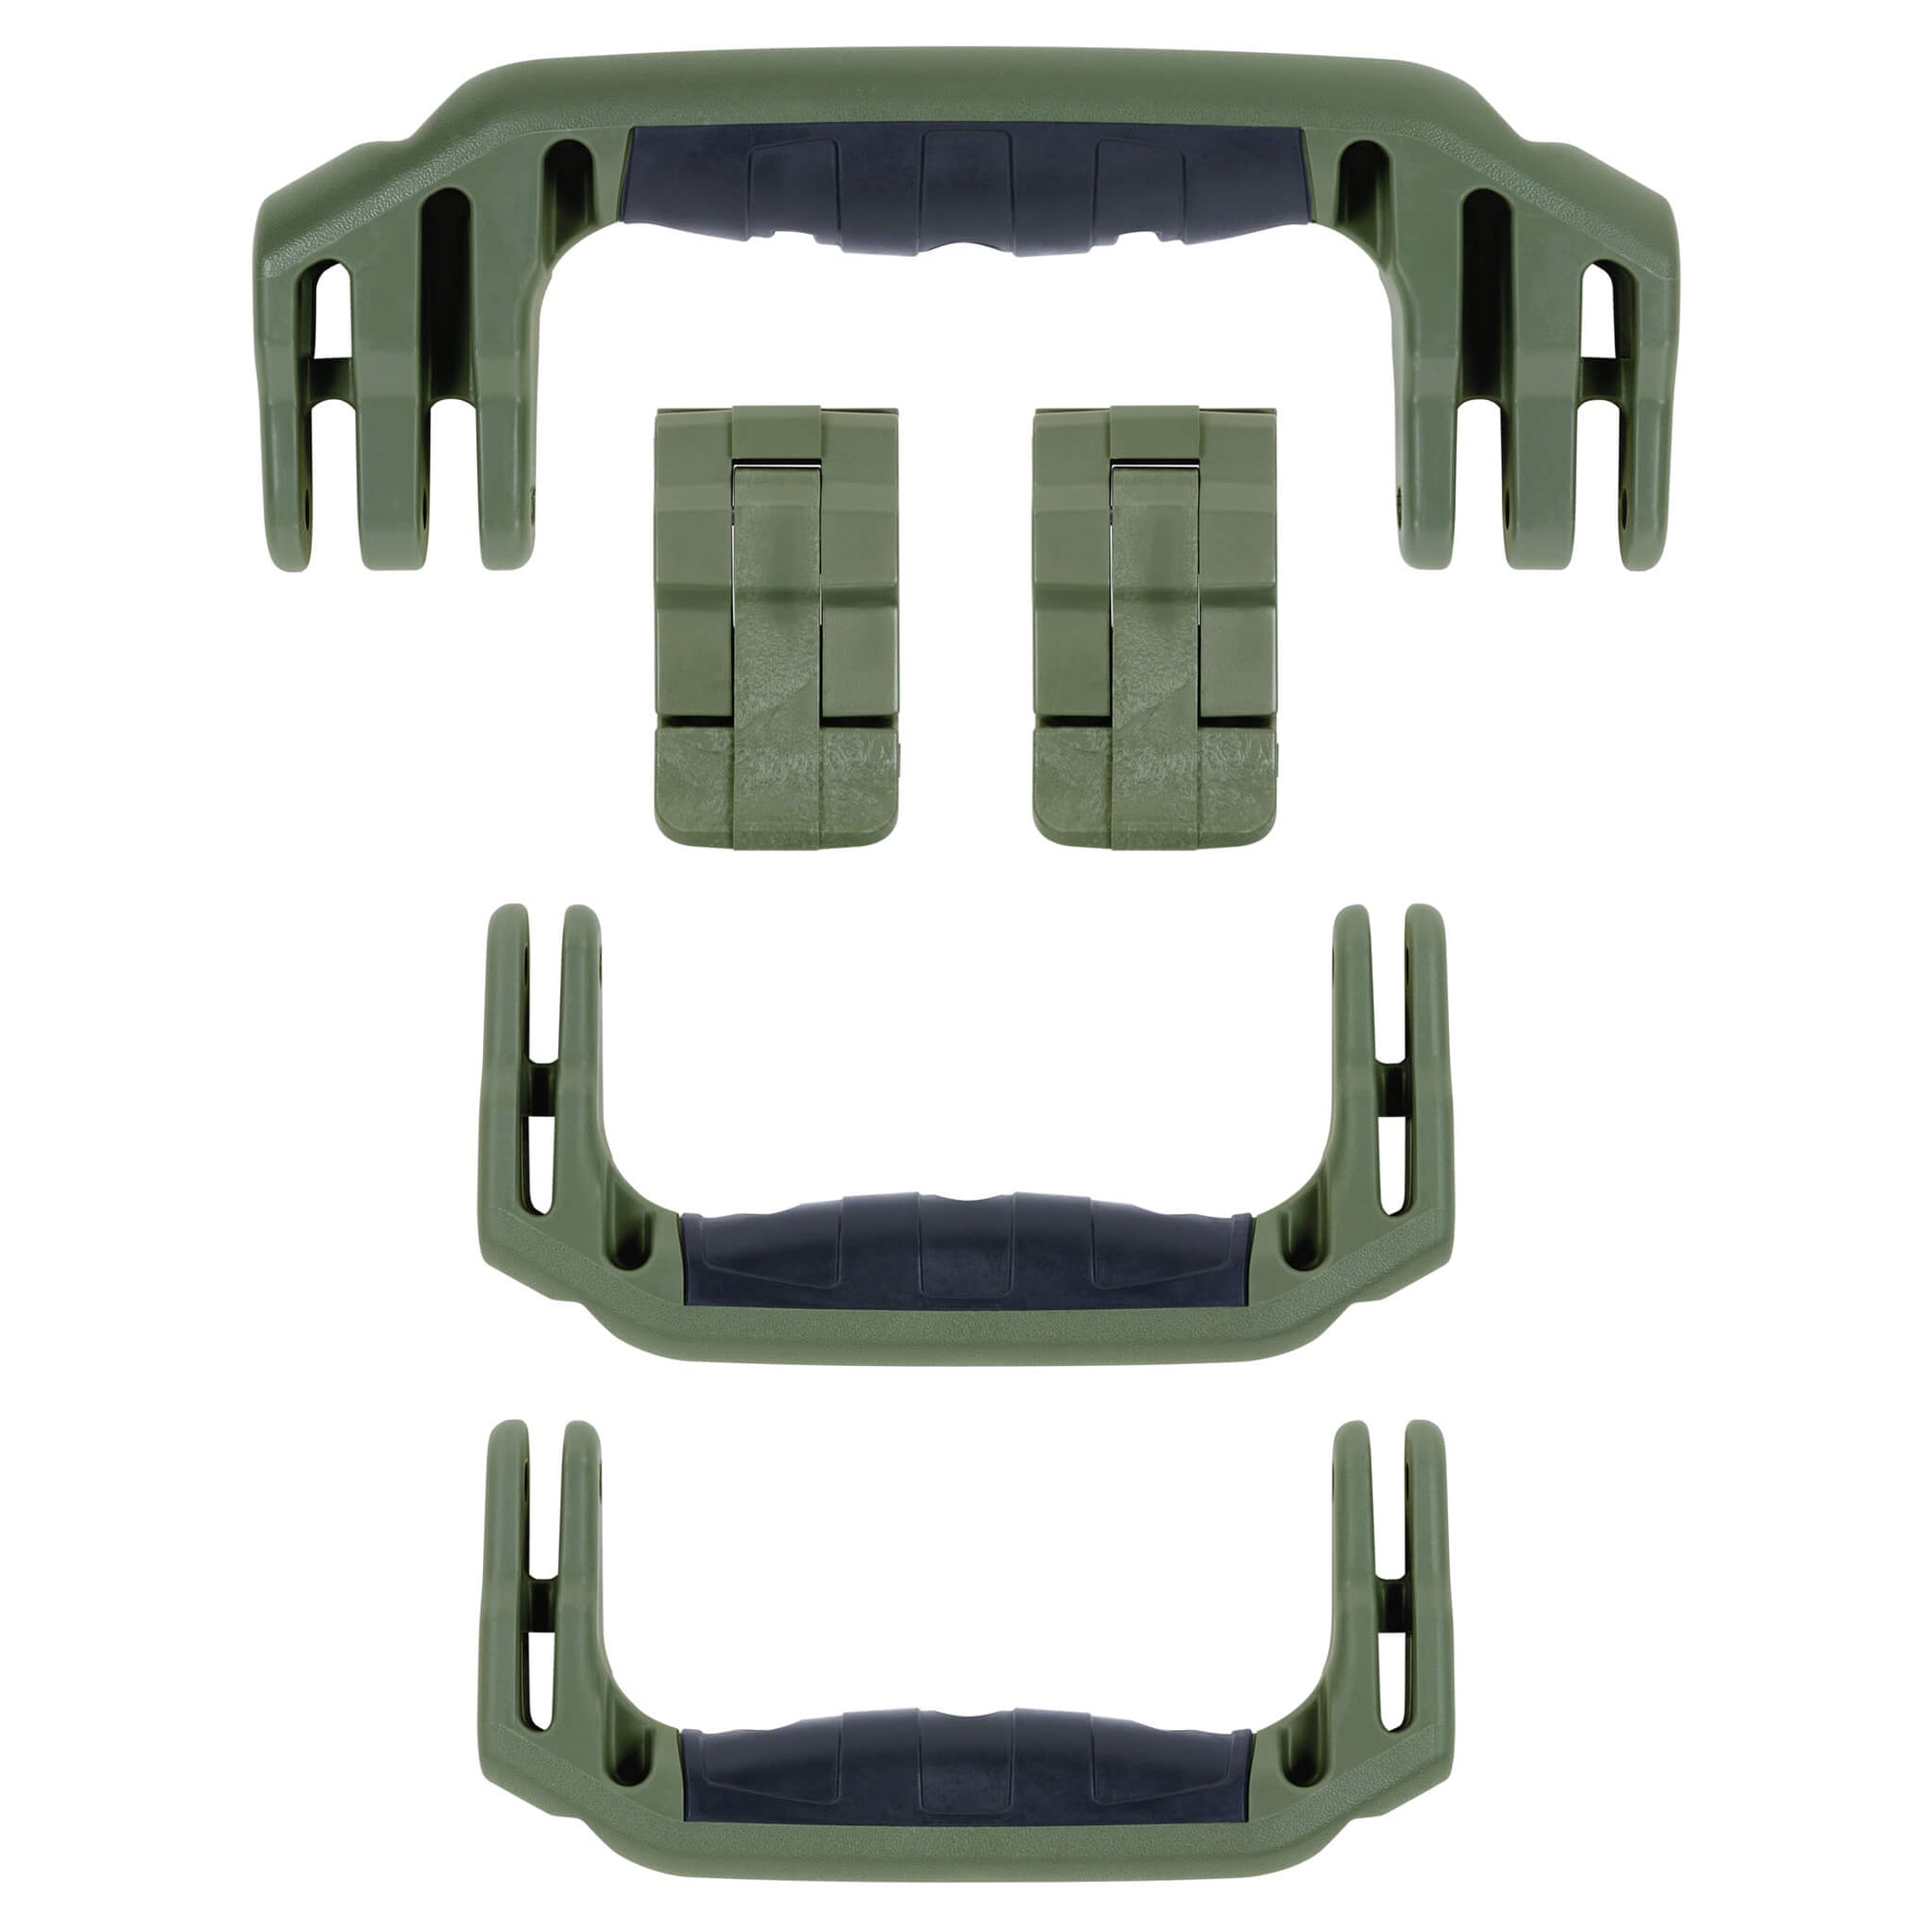 Pelican 1460 Replacement Handles & Latches, OD Green (Set of 3 Handles, 2 Latches) ColorCase 